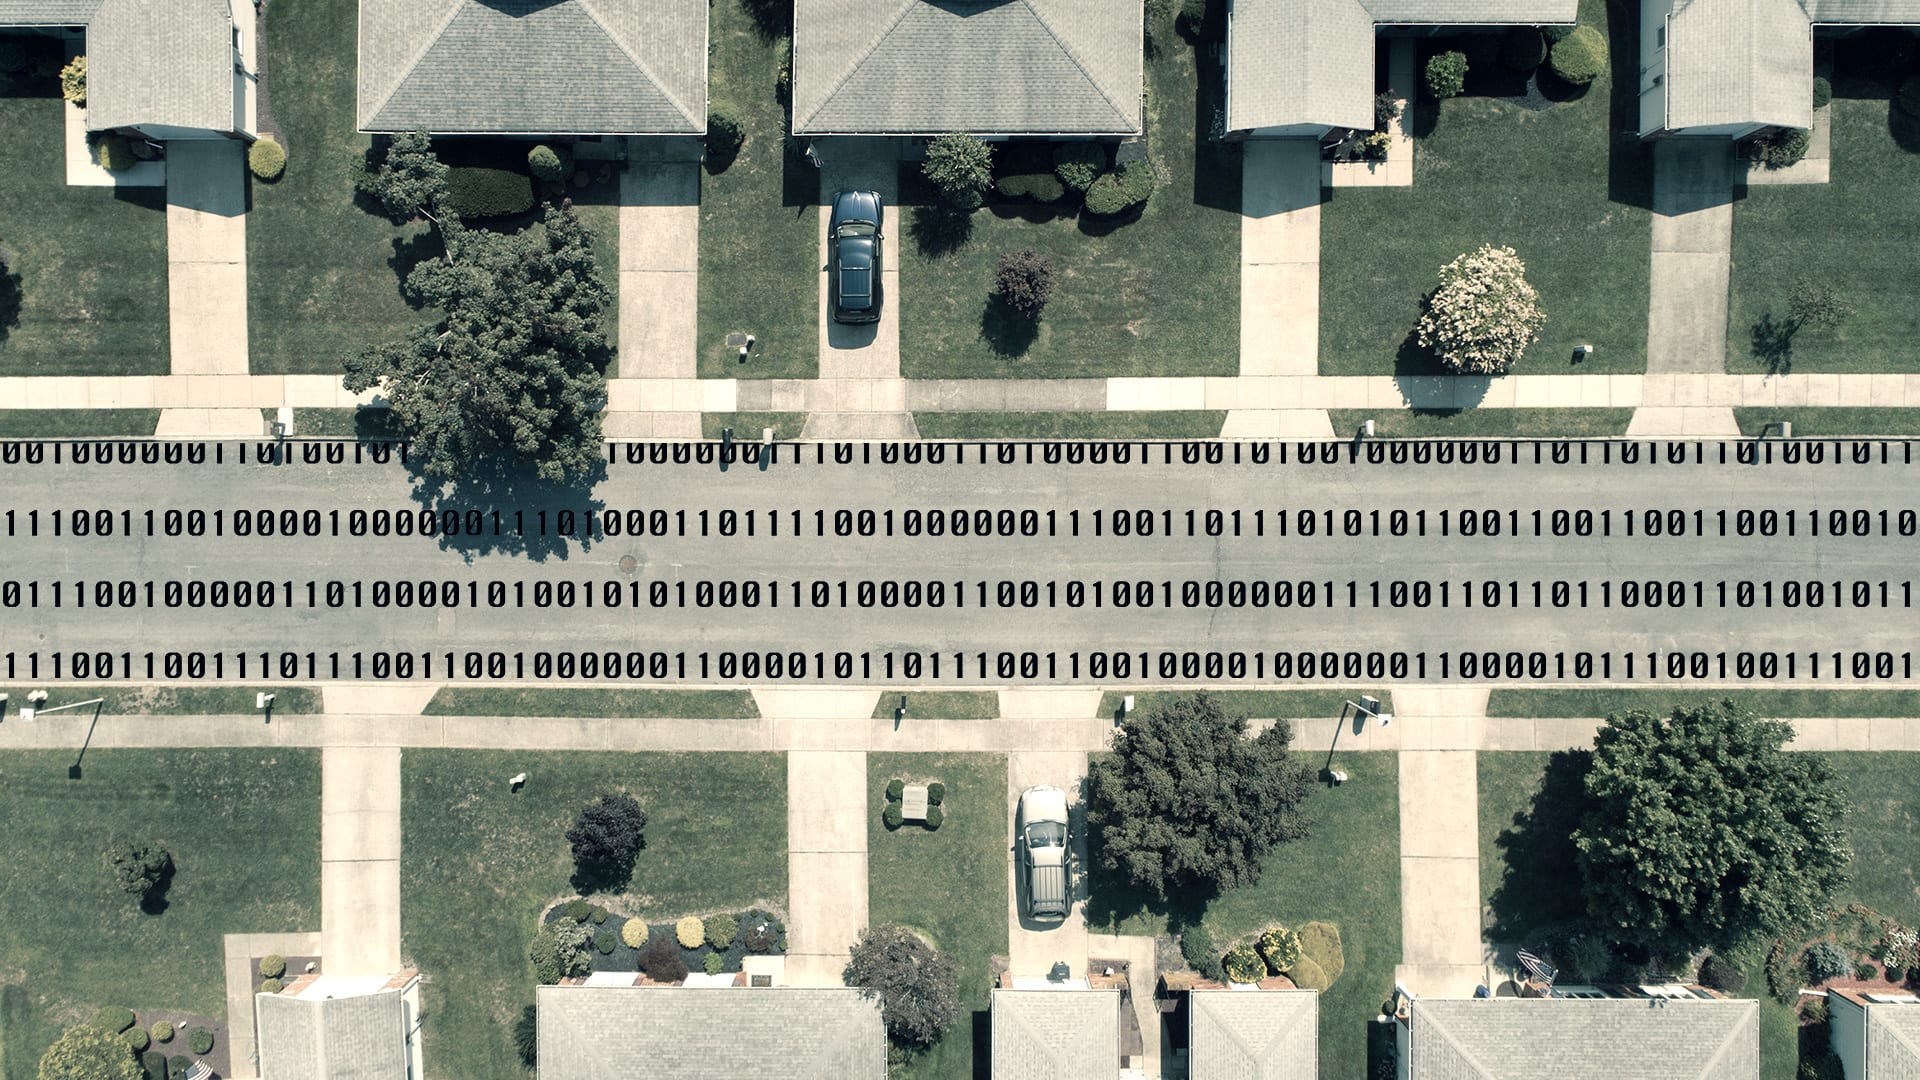 How big data could help make it easier for landlords to evict you